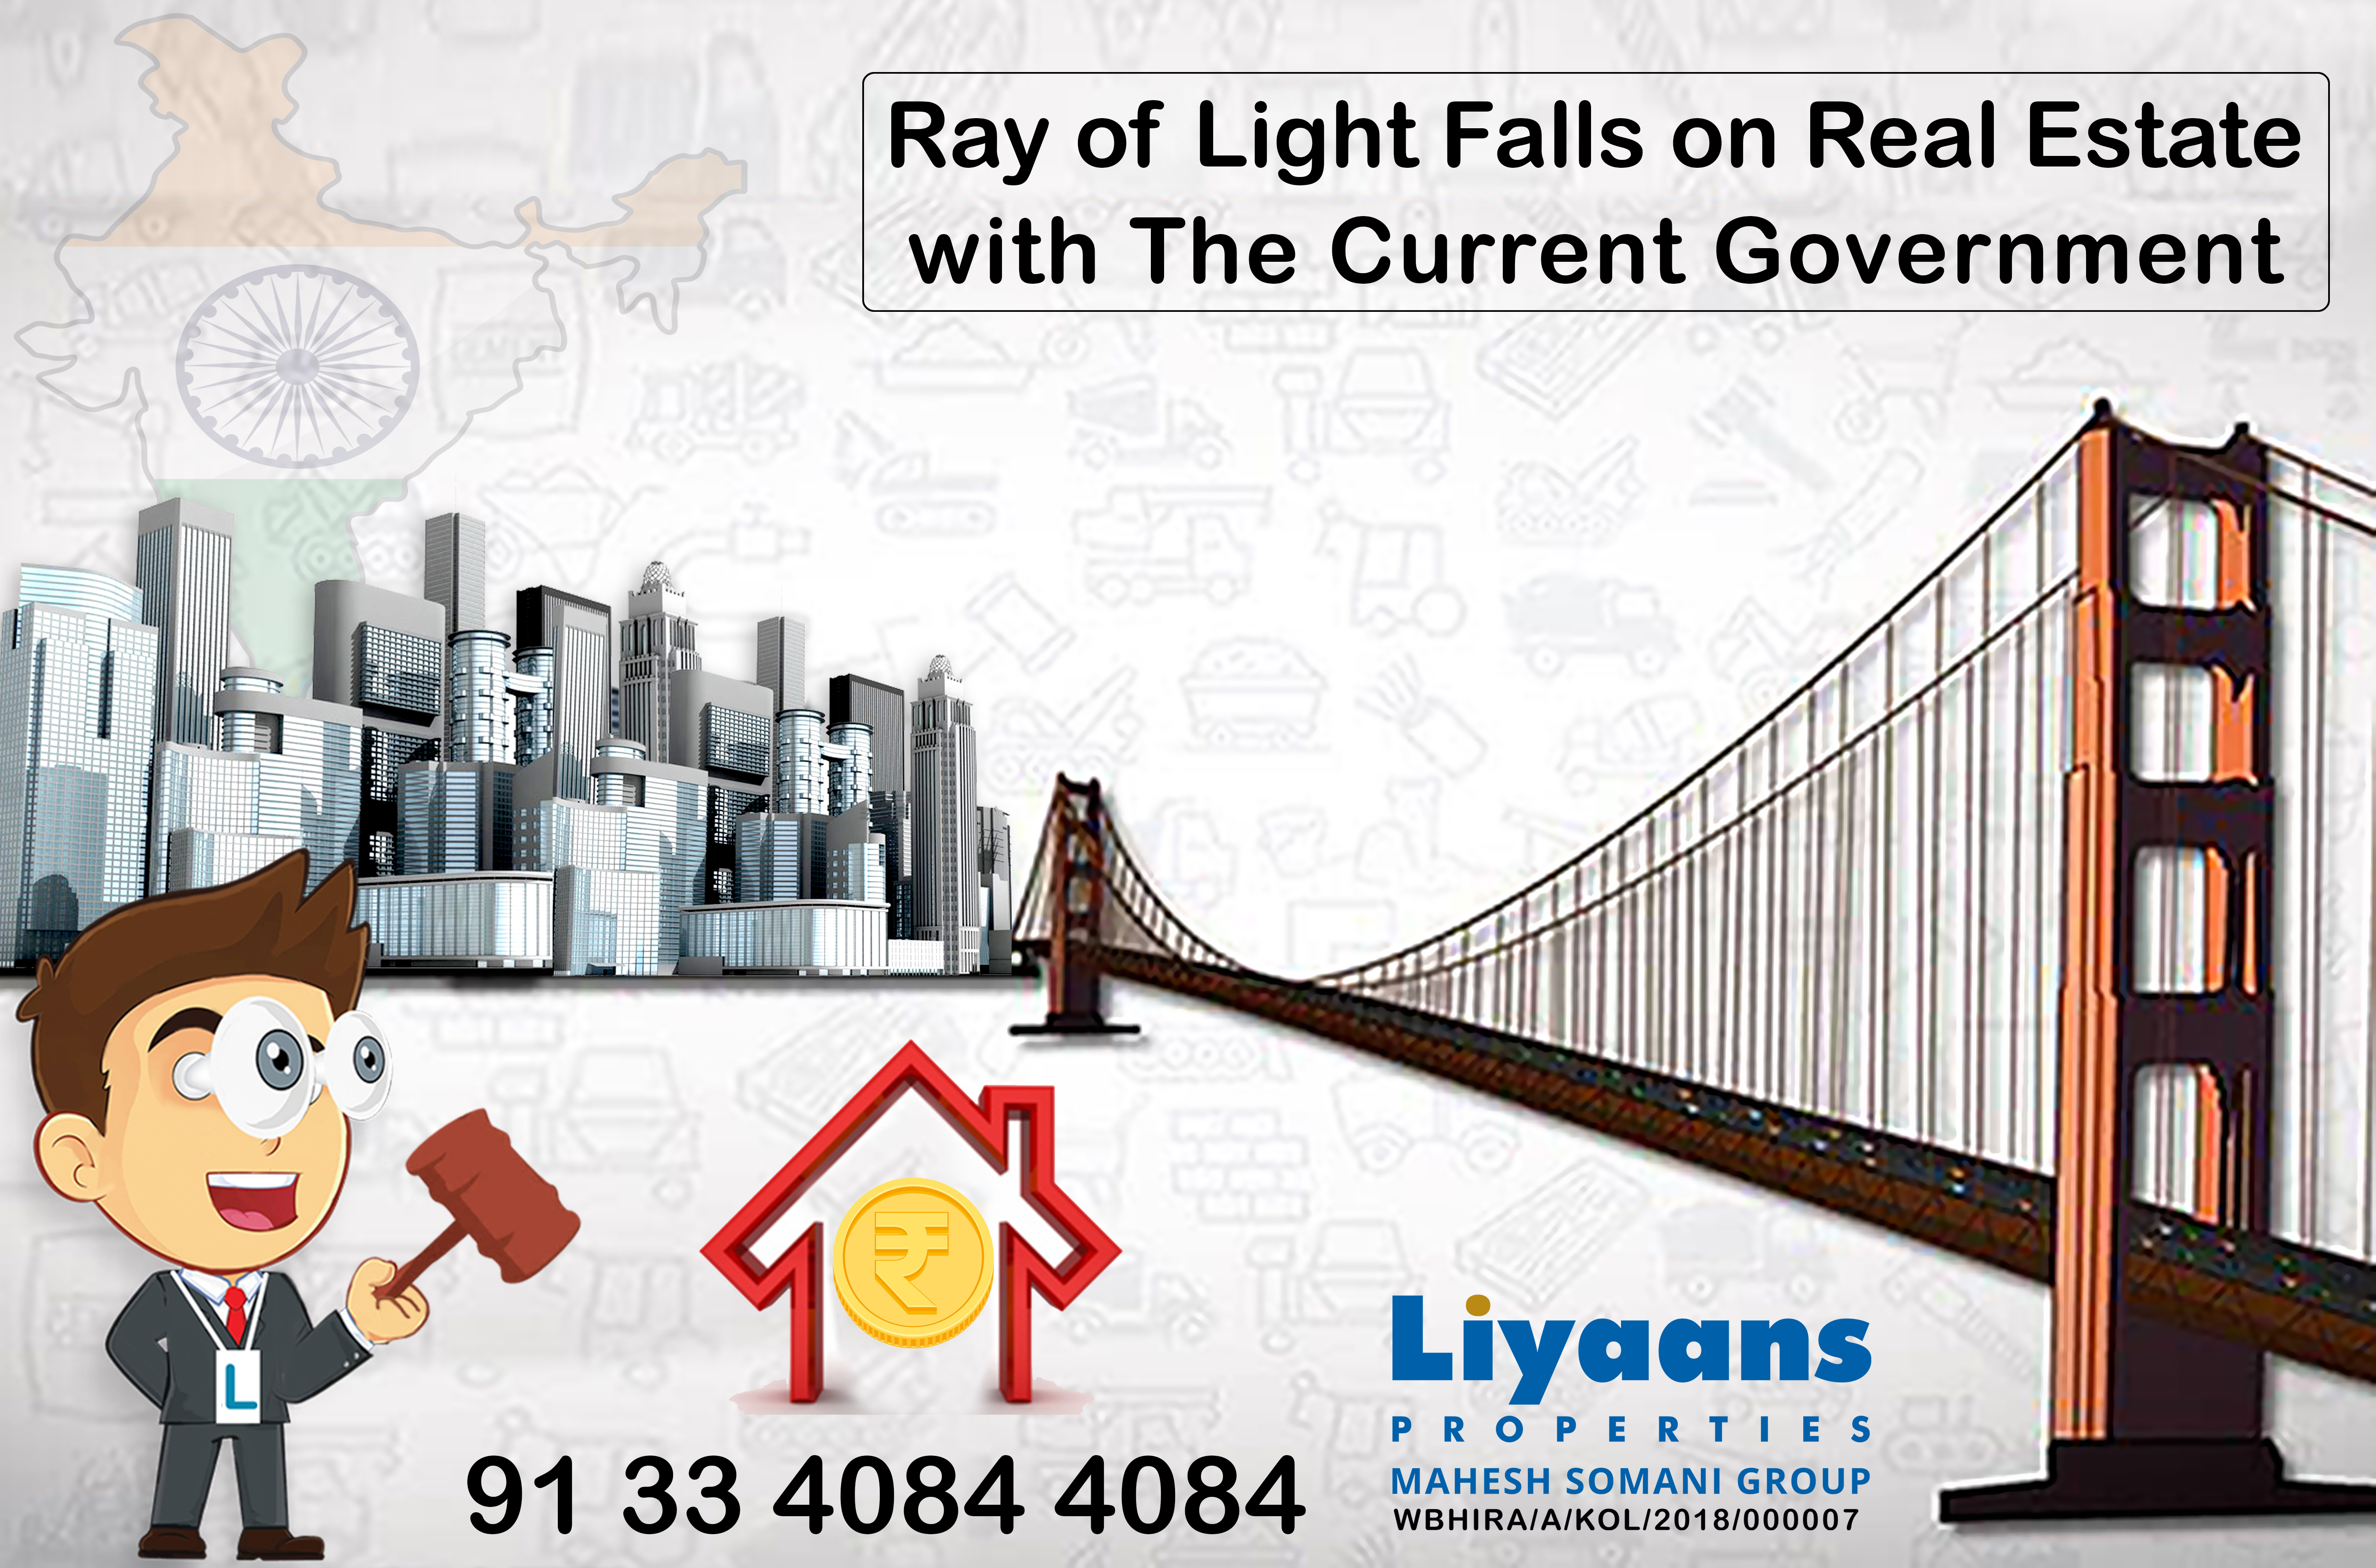 Ray of Light Falls on Real Estate with The Current Government